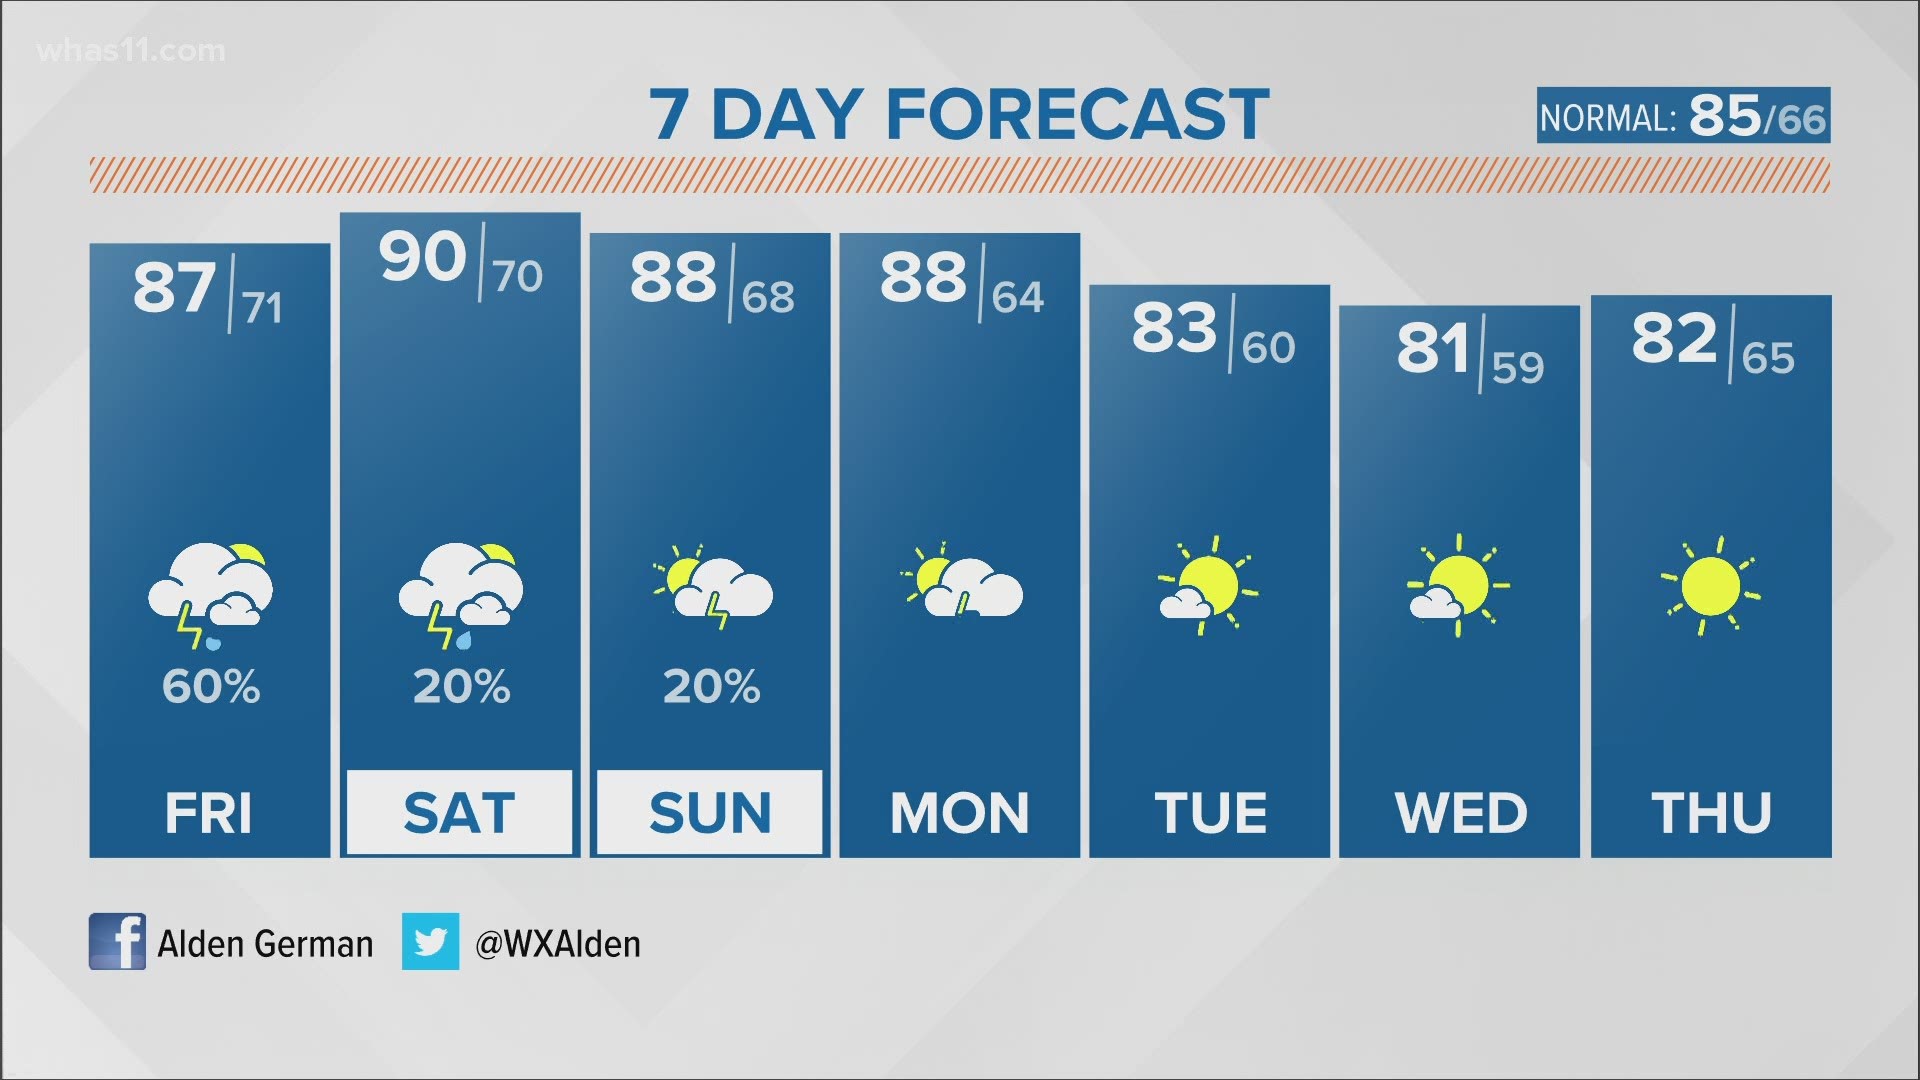 Heavy rain will be possible in afternoon storms, but the weekend will be drier and hotter.